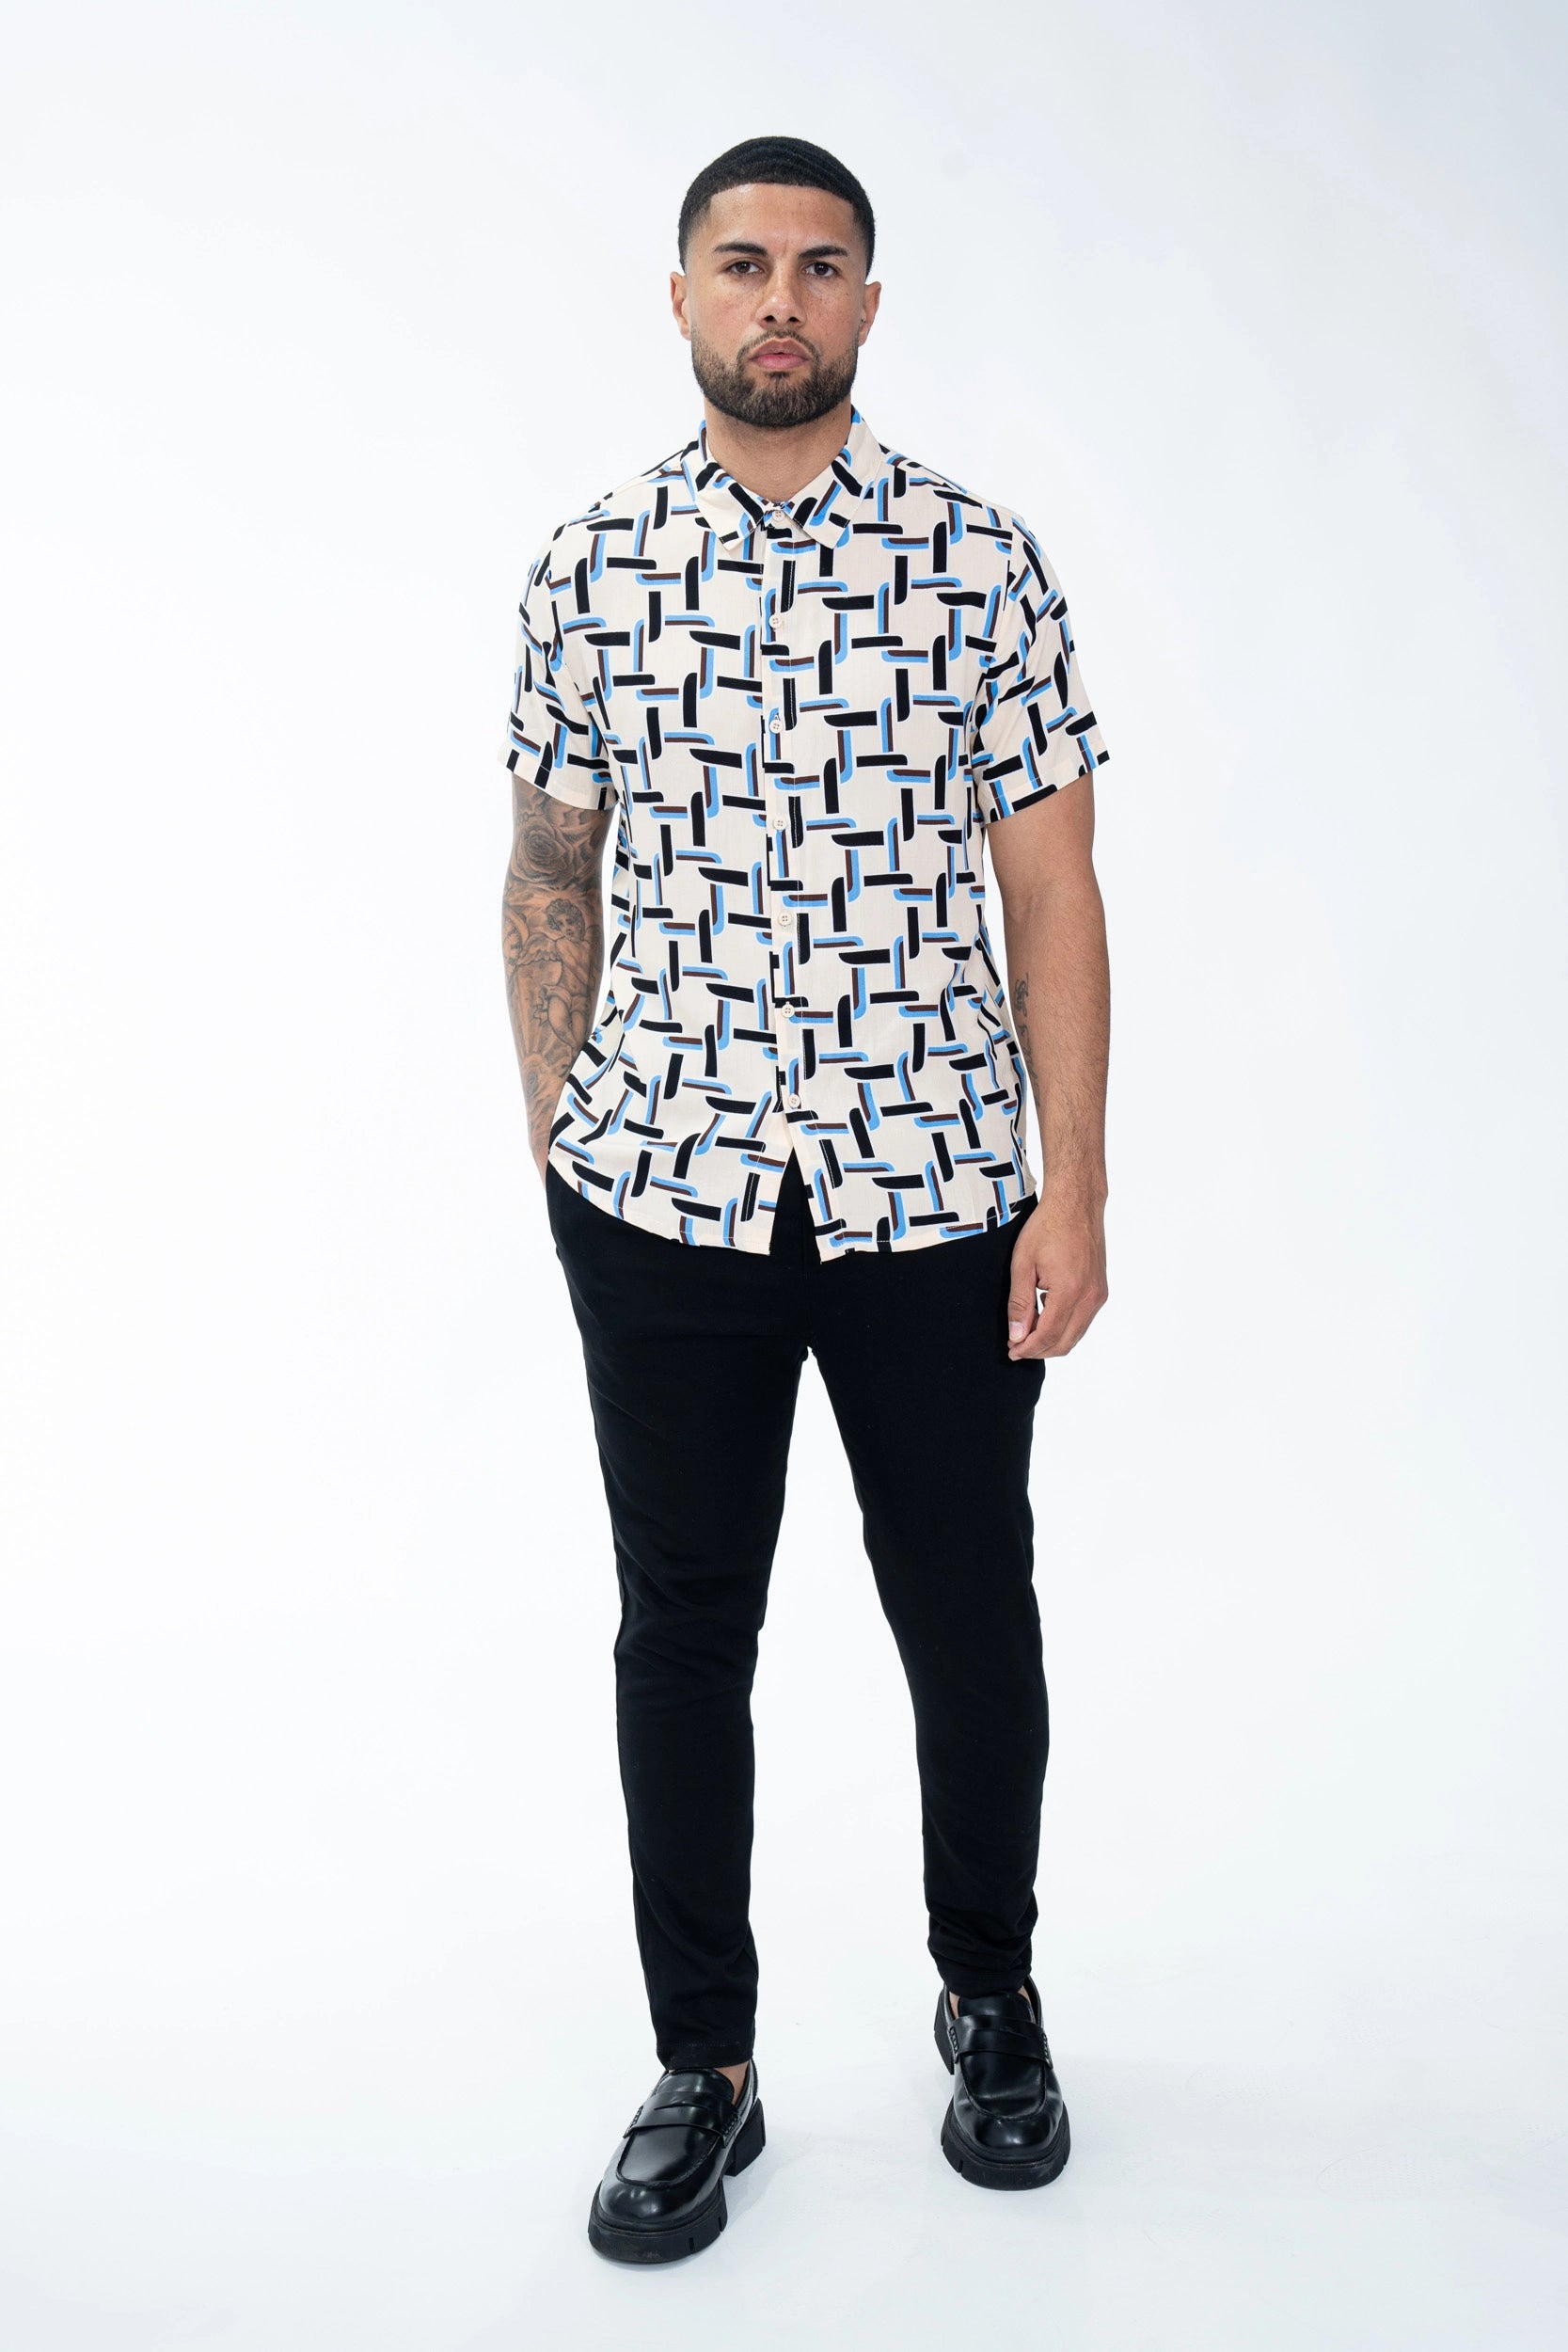 Abstract art-inspired casual shirt